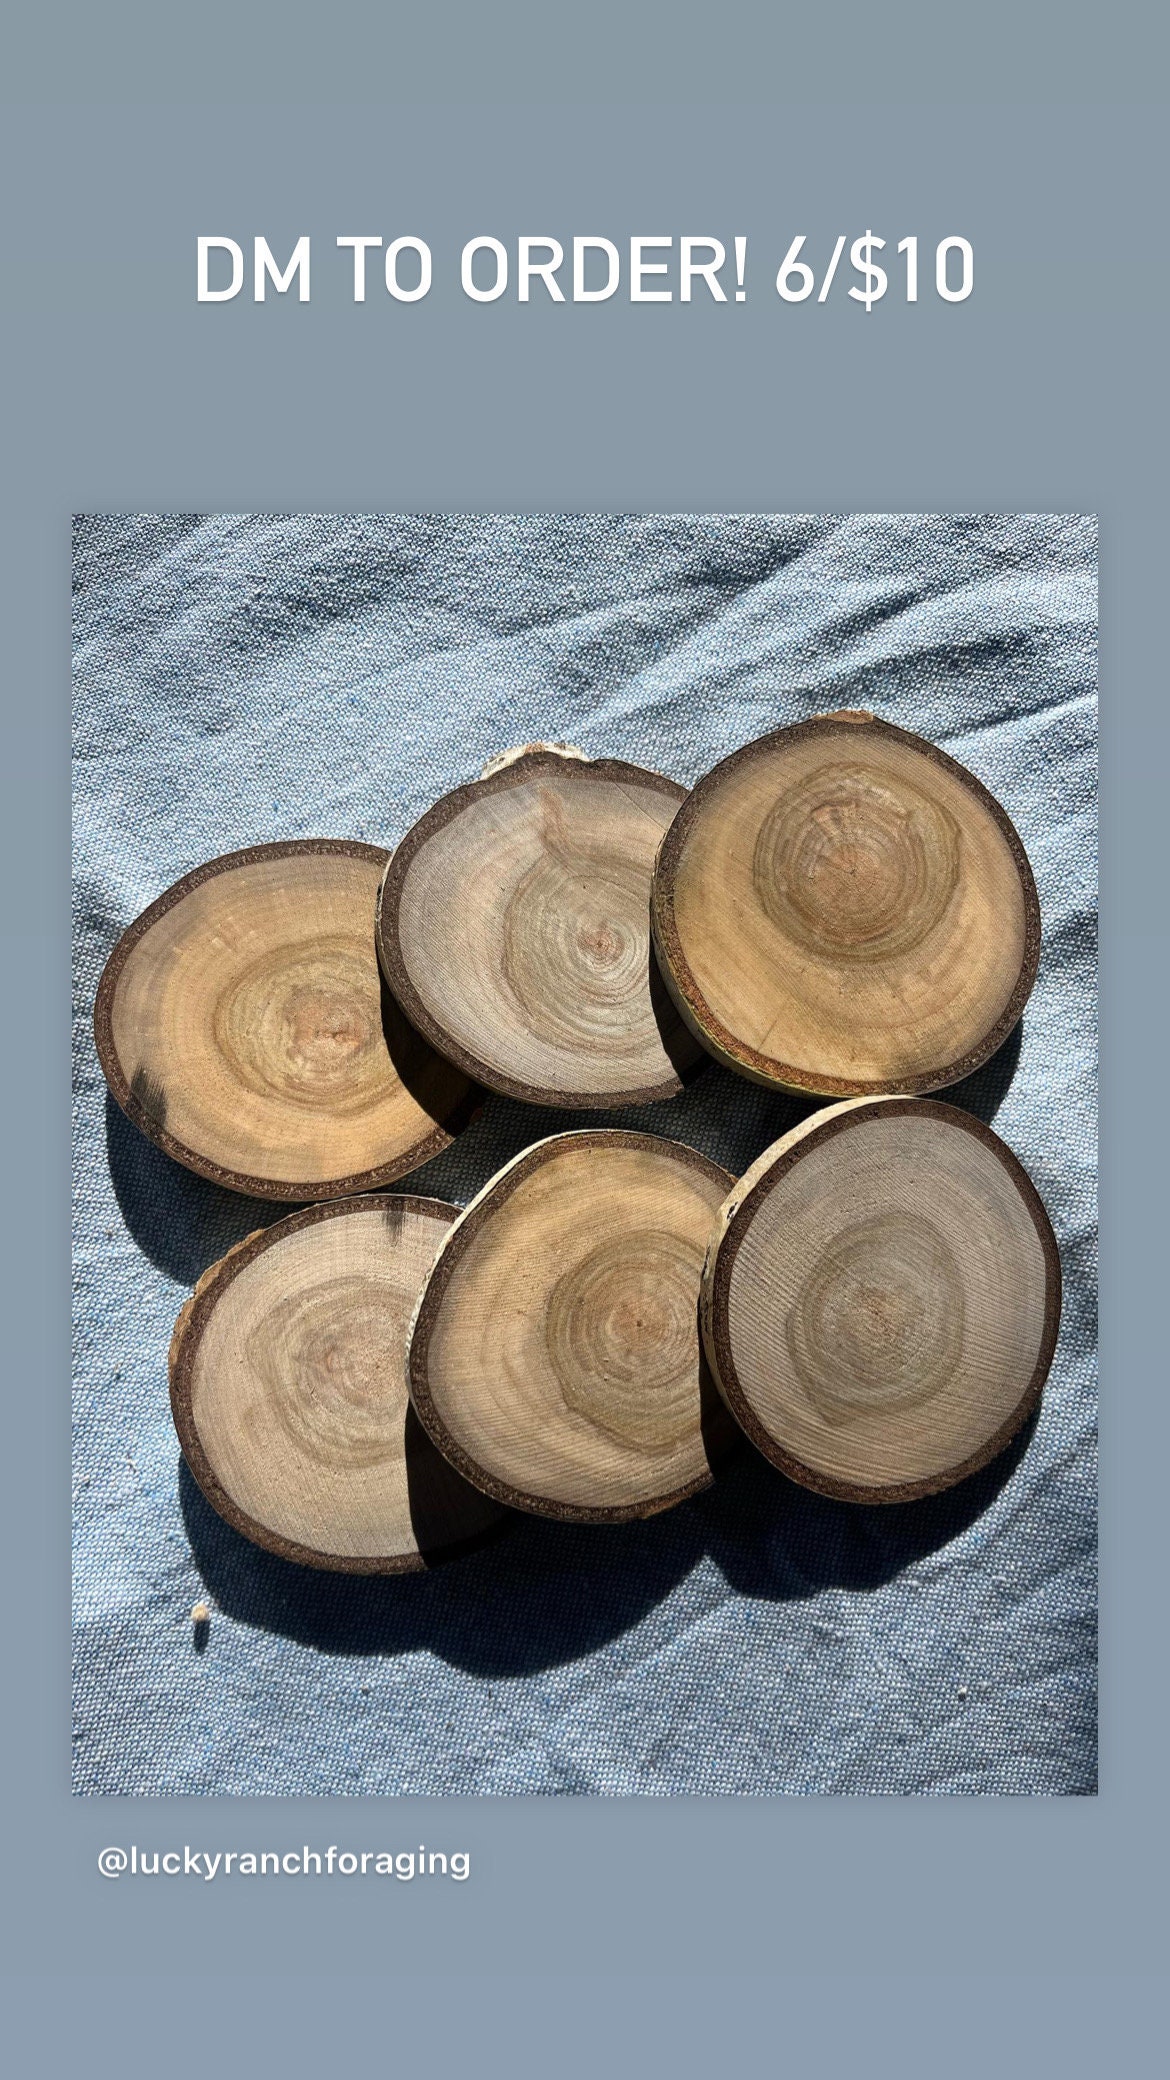 Aspen Wood Slices Coasters, Ornaments, Engraving Woodburning Crafts With  Bark 2 1/2 3 X 1/2 